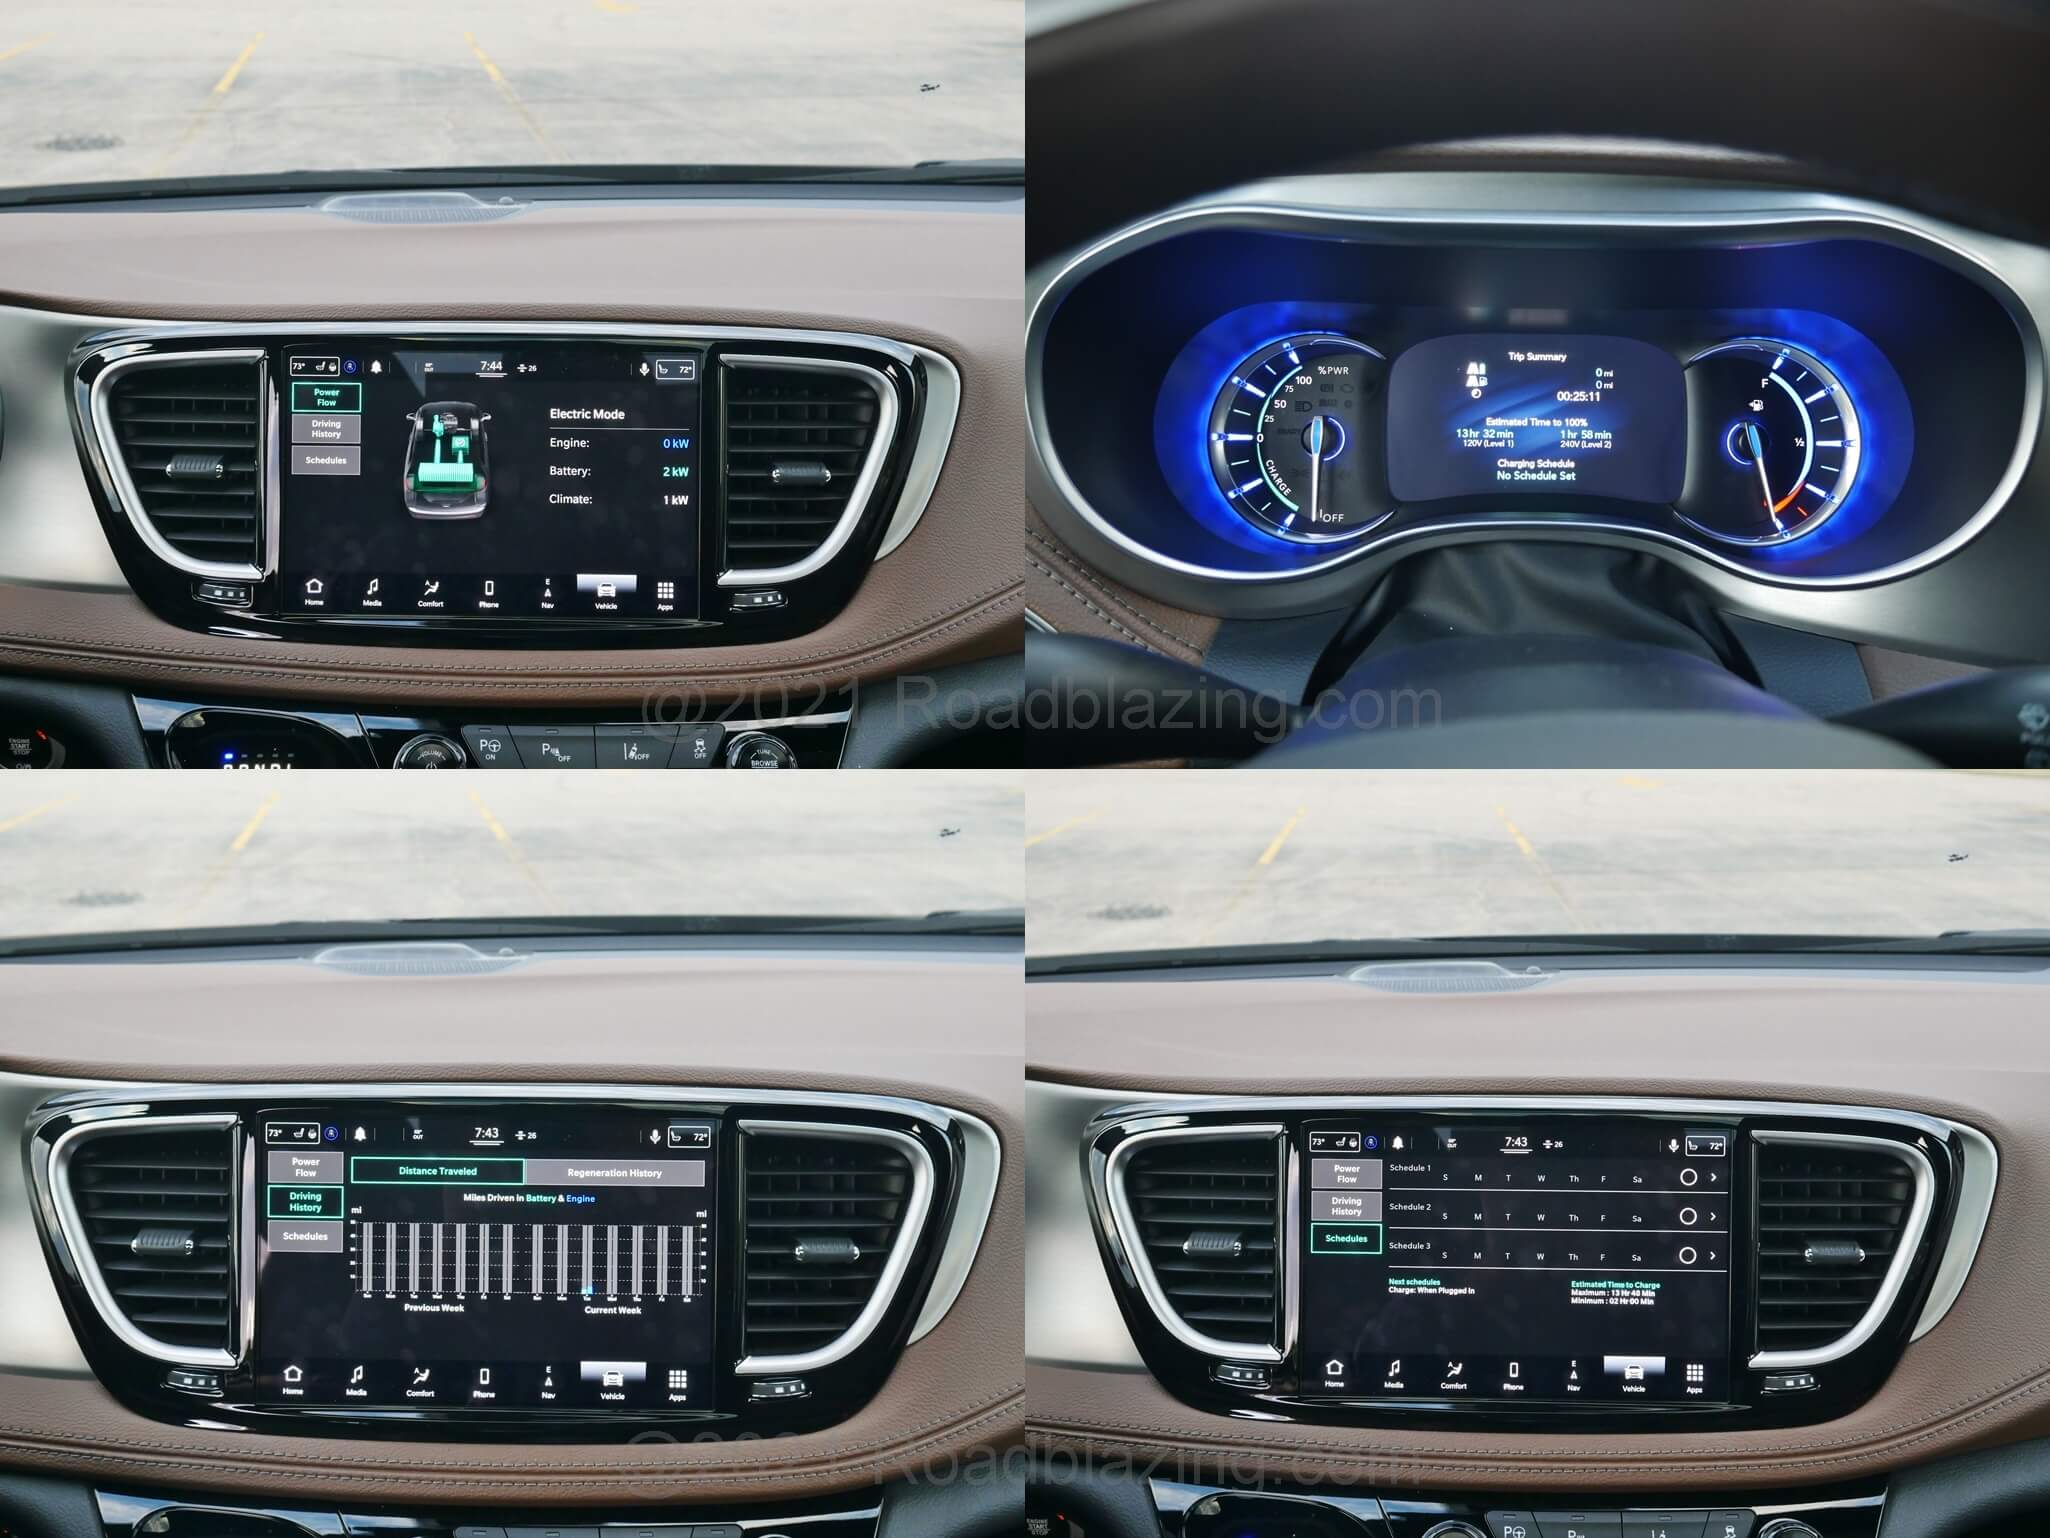 2021 Chrysler Pacifica Limited Hybrid PHEV: battery charging status